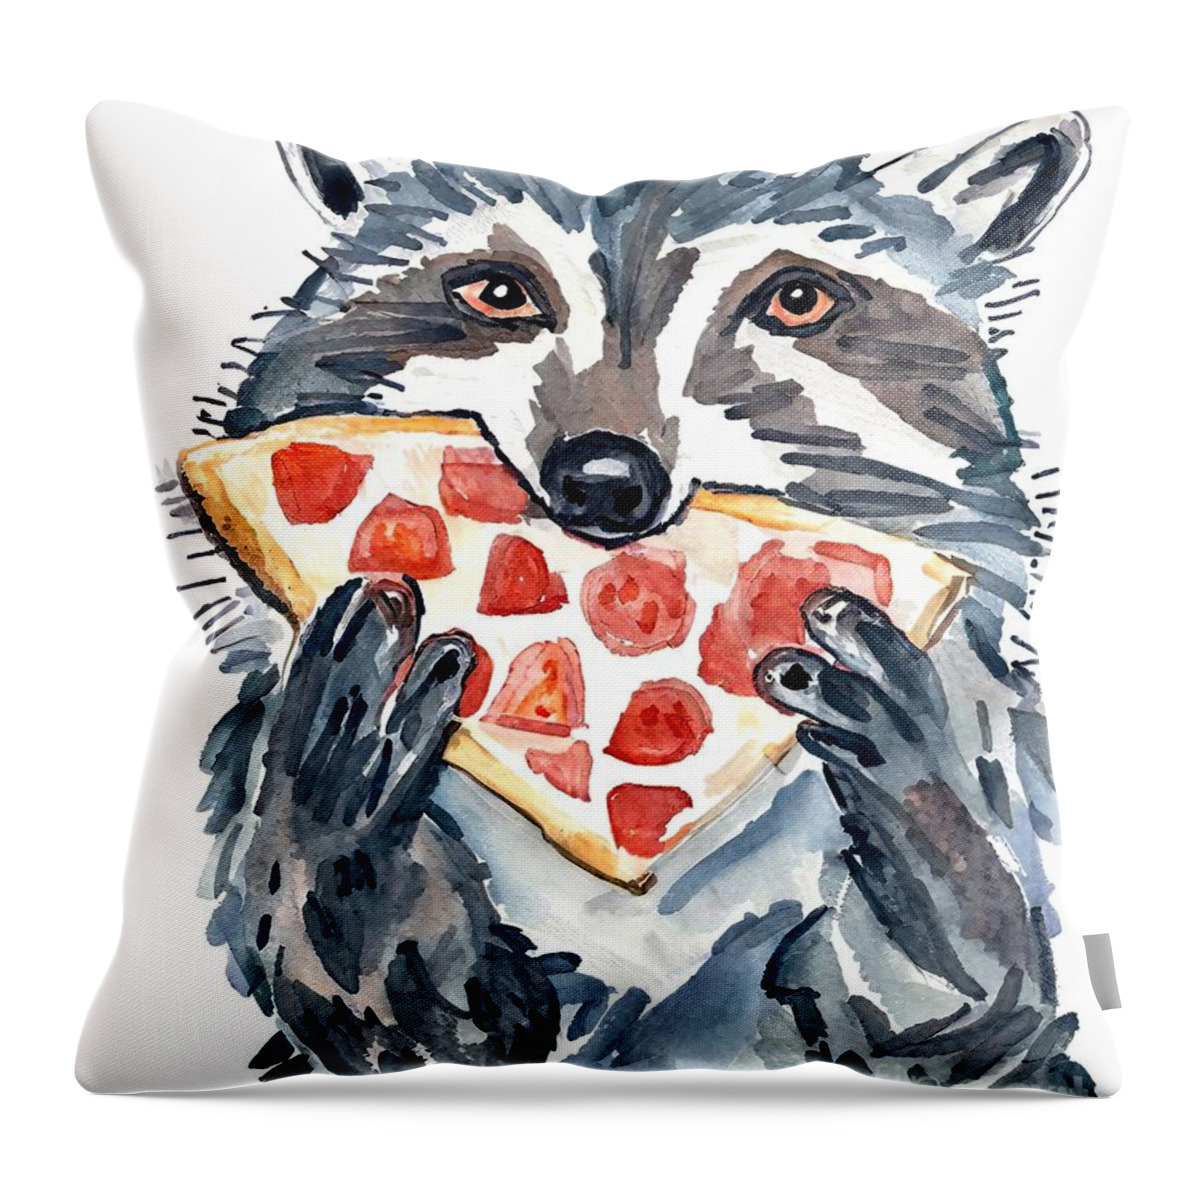 Animal Throw Pillow featuring the painting Painting Raccoon Pizza Watercolor Painting animal by N Akkash